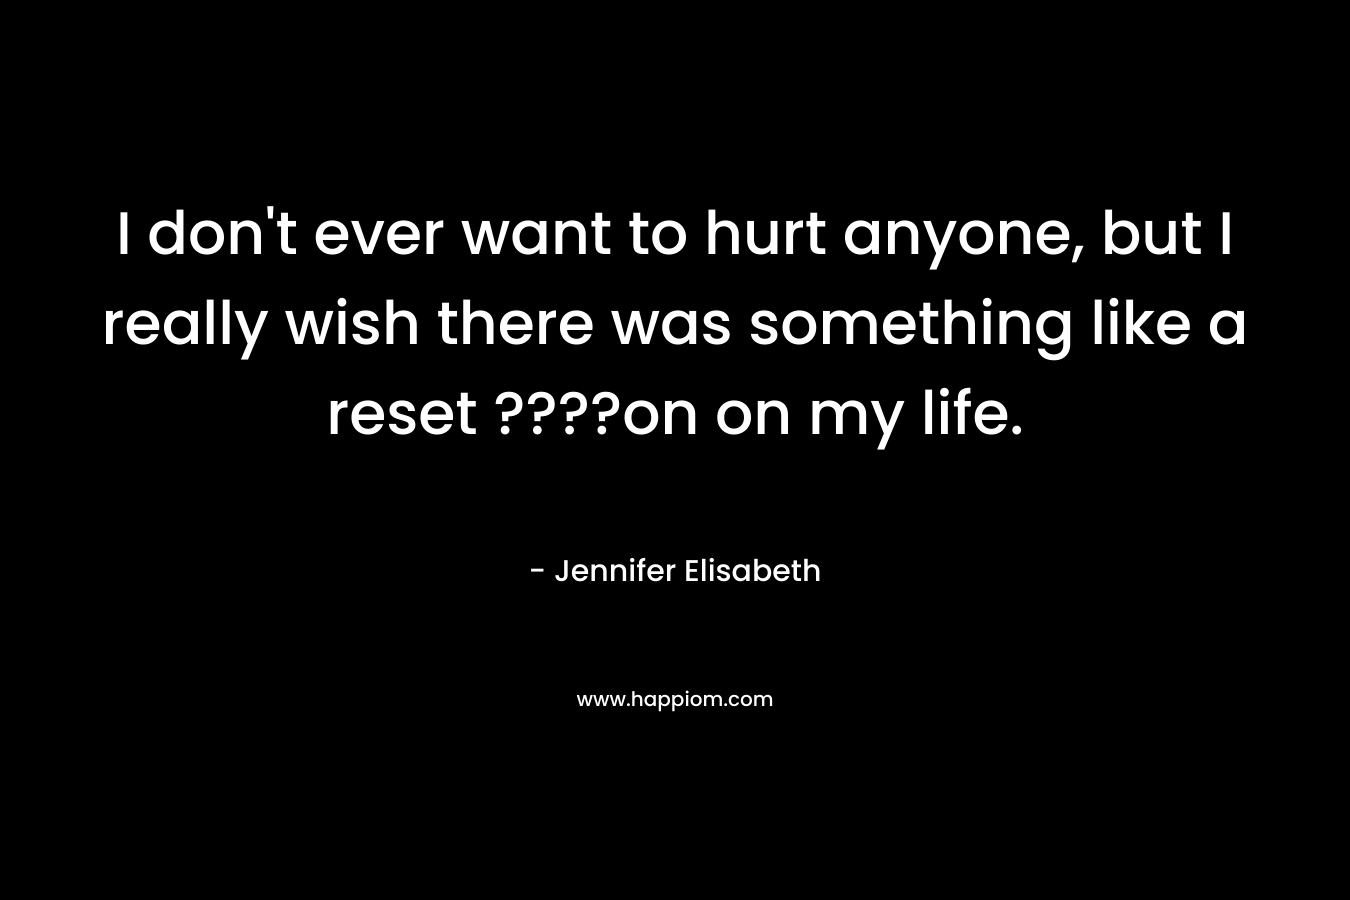 I don't ever want to hurt anyone, but I really wish there was something like a reset ????on on my life.